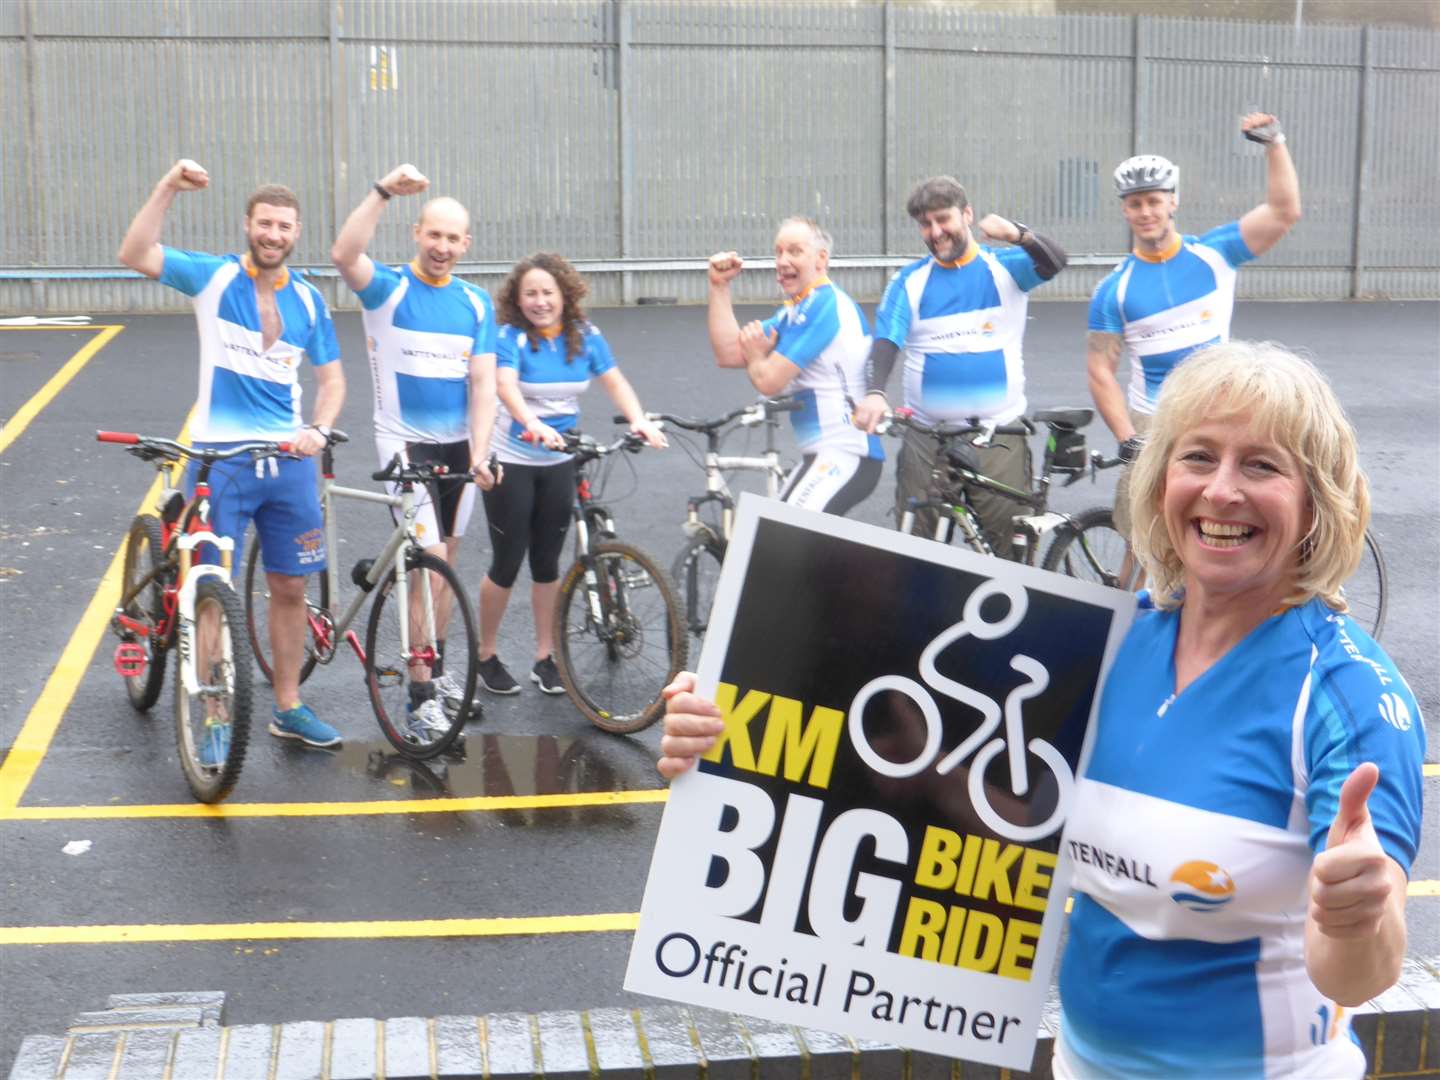 Melanie Rogers and the Vattenfall team are supporting the KM Big Bike Ride.